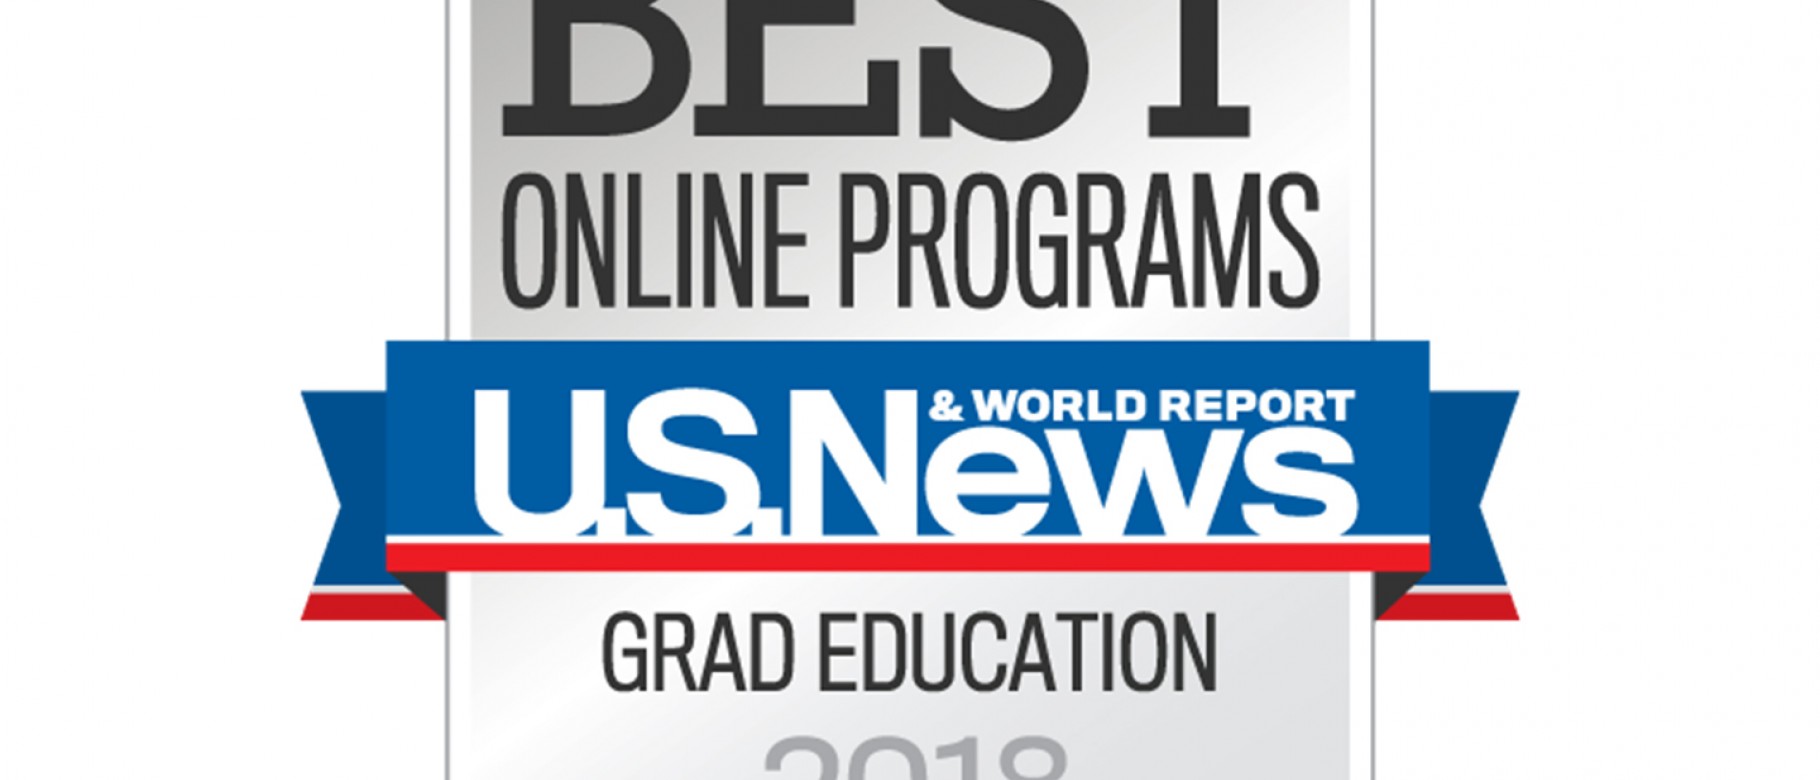 U.S. News and World Report names UNE Online one of top online programs in graduate education